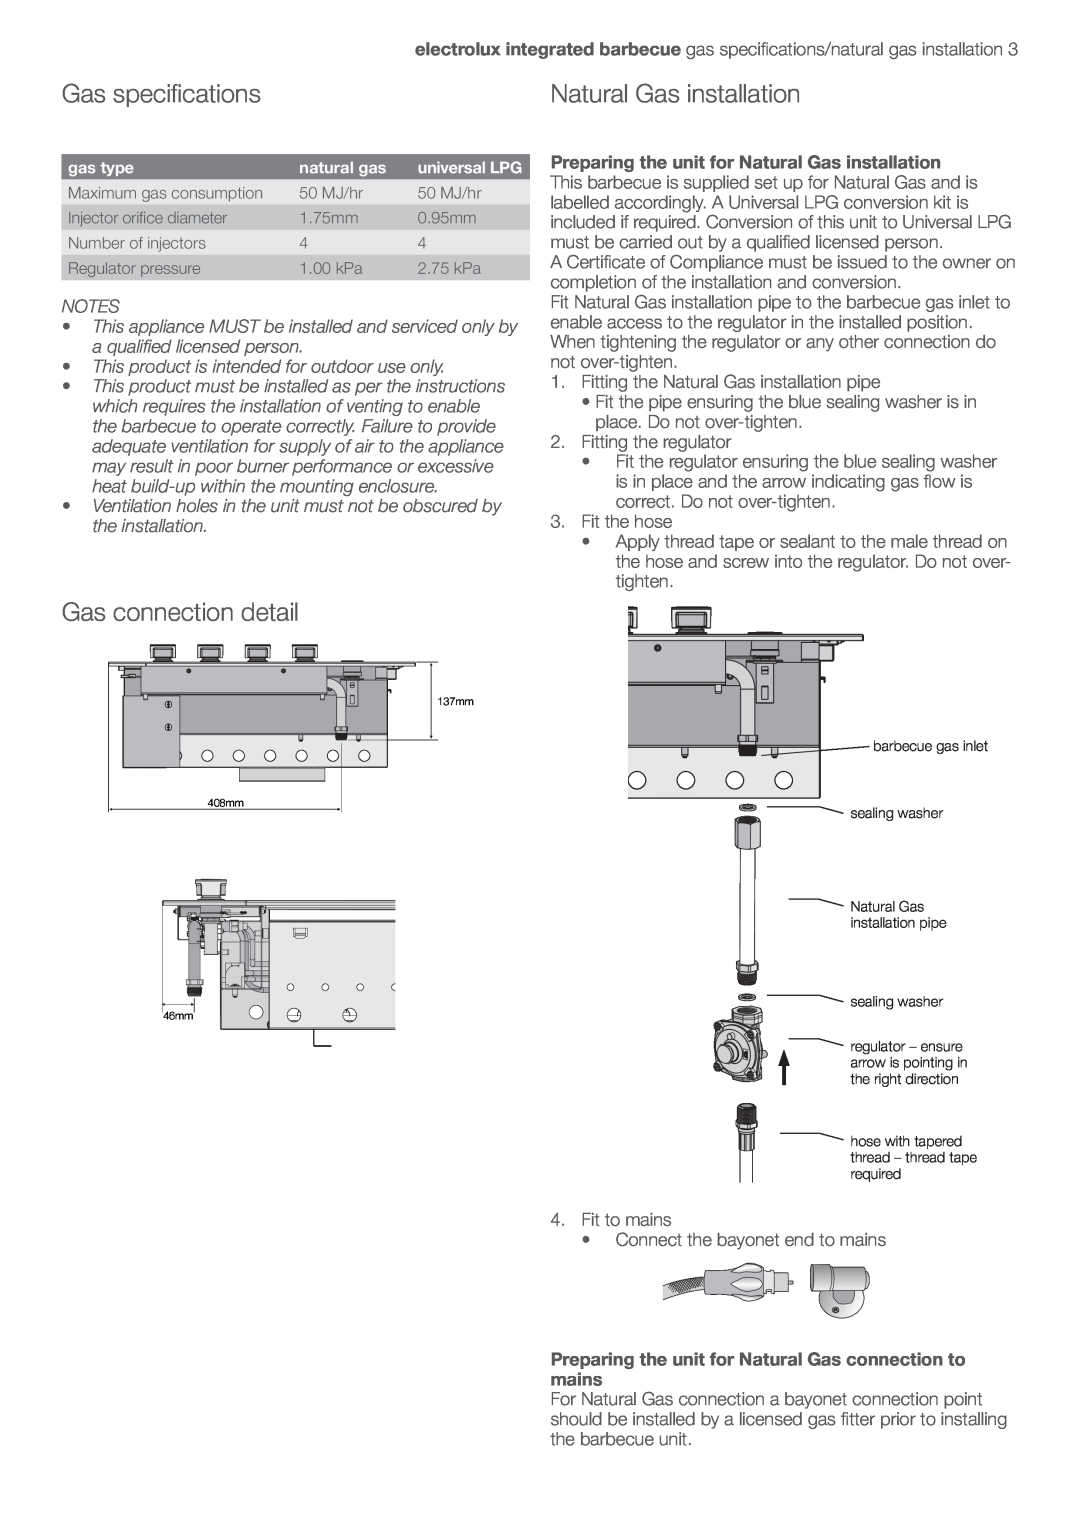 Electrolux EQBL100AS user manual Gas speciﬁcations, Gas connection detail, Natural Gas installation 